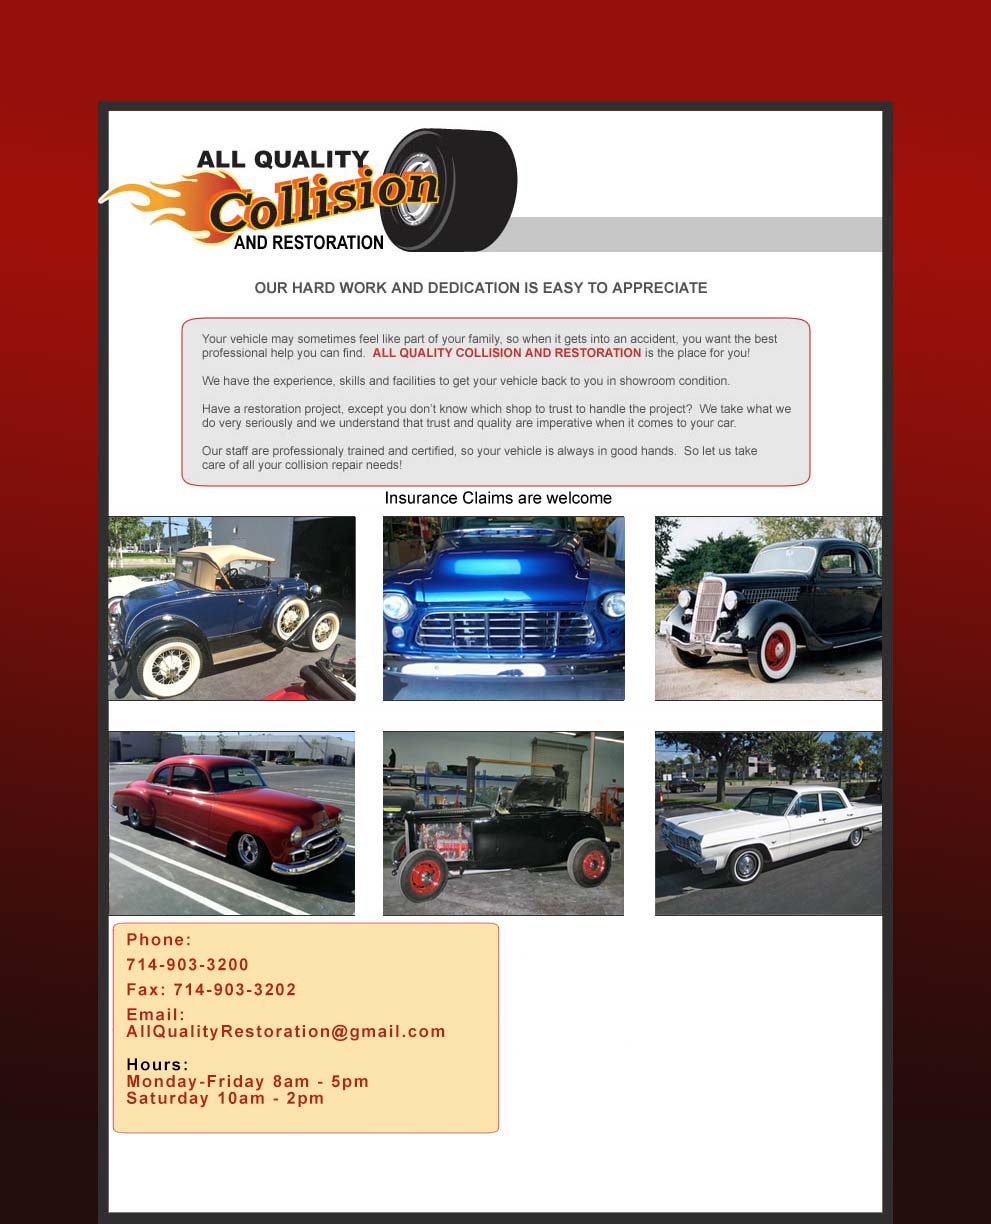 All Quality Restoration Collision, All Quality Collison, All Quality Restoration